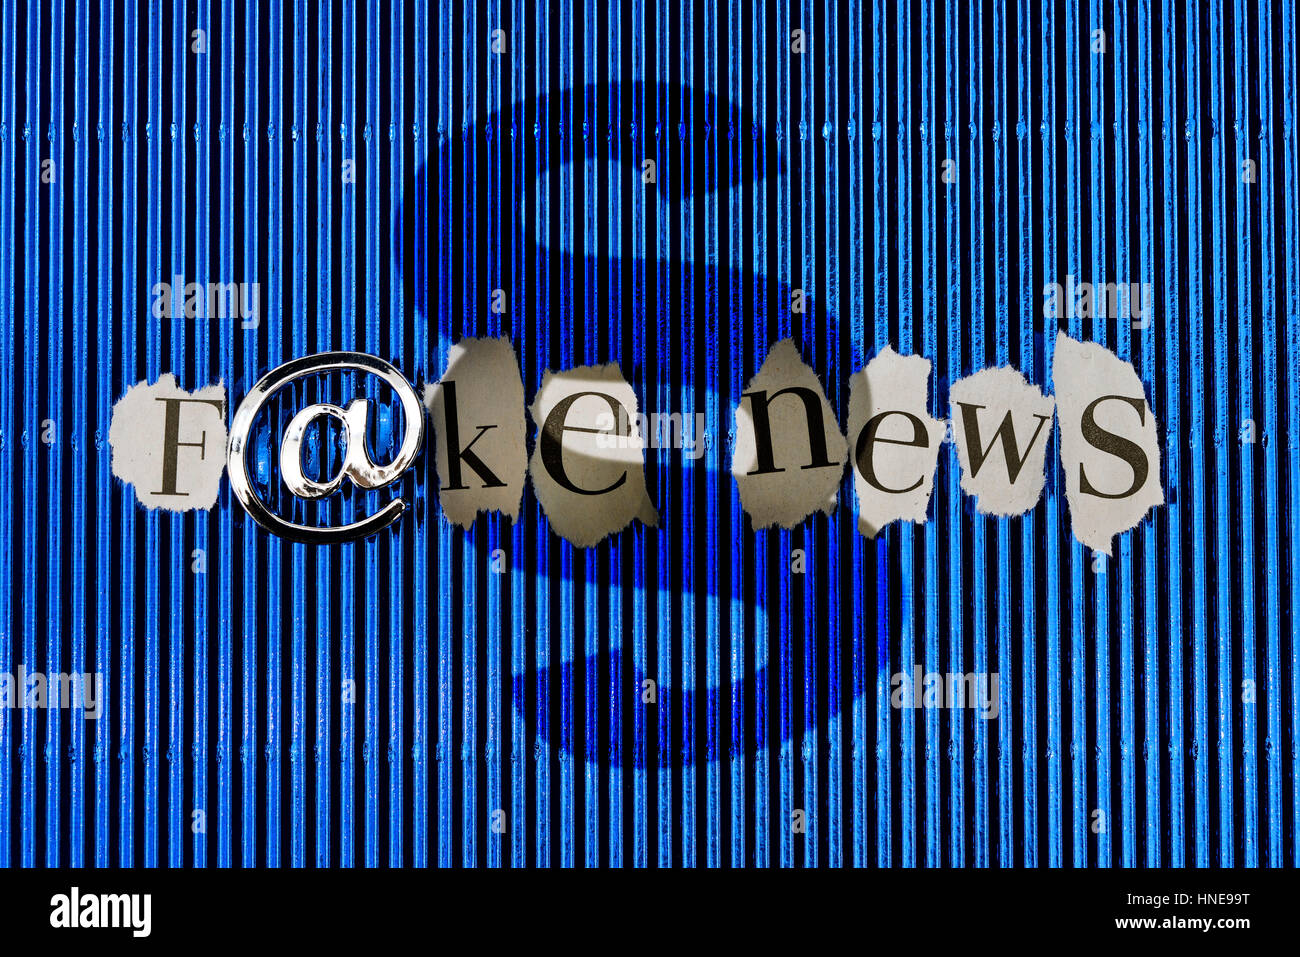 Stroke Fake news with at-sign and section sign, jurisdiction by the spreading of false alarms, Schriftzug Fake News mit At-Zeichen und Paragraphenzeic Stock Photo